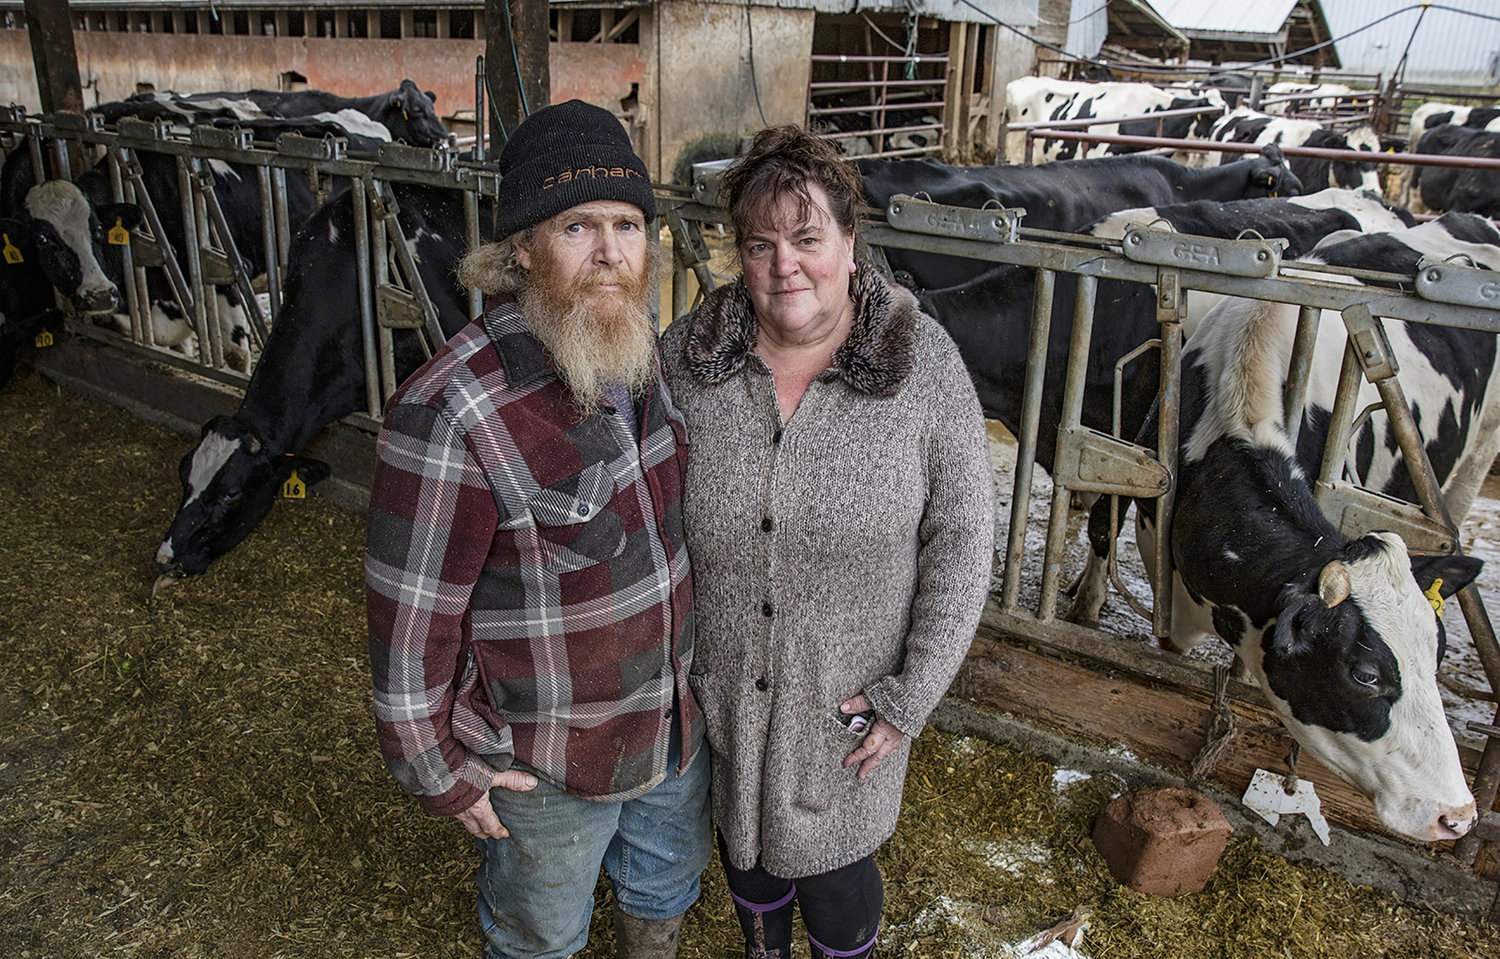 David Baumgardner and his wife, Lucinda, with some of their dairy cows that survived flooding, on Nov. 24, 2021, in Mount Vernon, Washington. (Ken Lambert/Seattle Times/TNS)